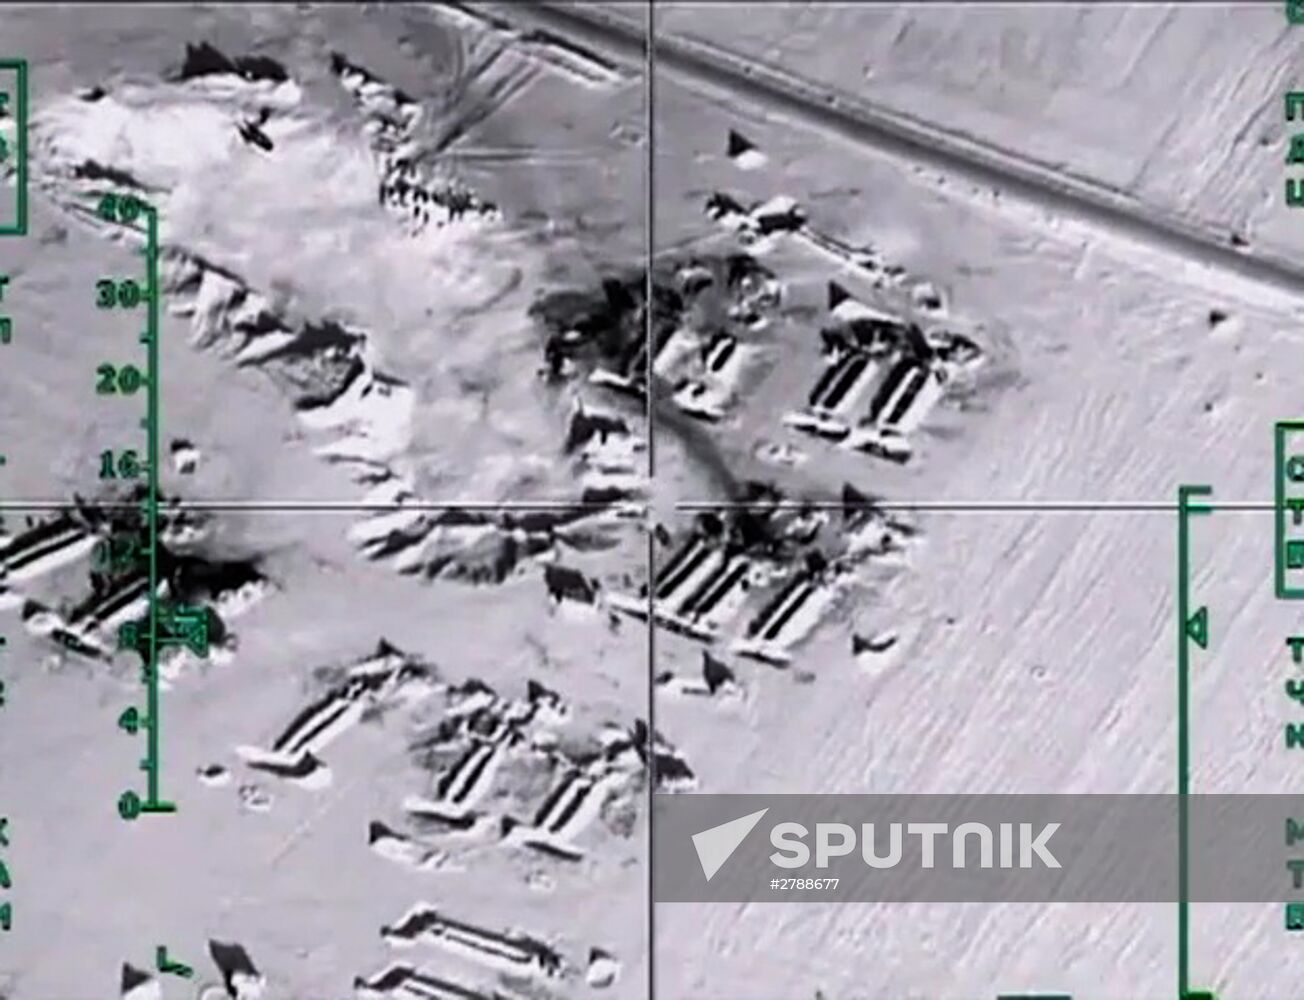 Russian warplanes destroy ISIS oil storage tanks in Aleppo Governorate, Syria